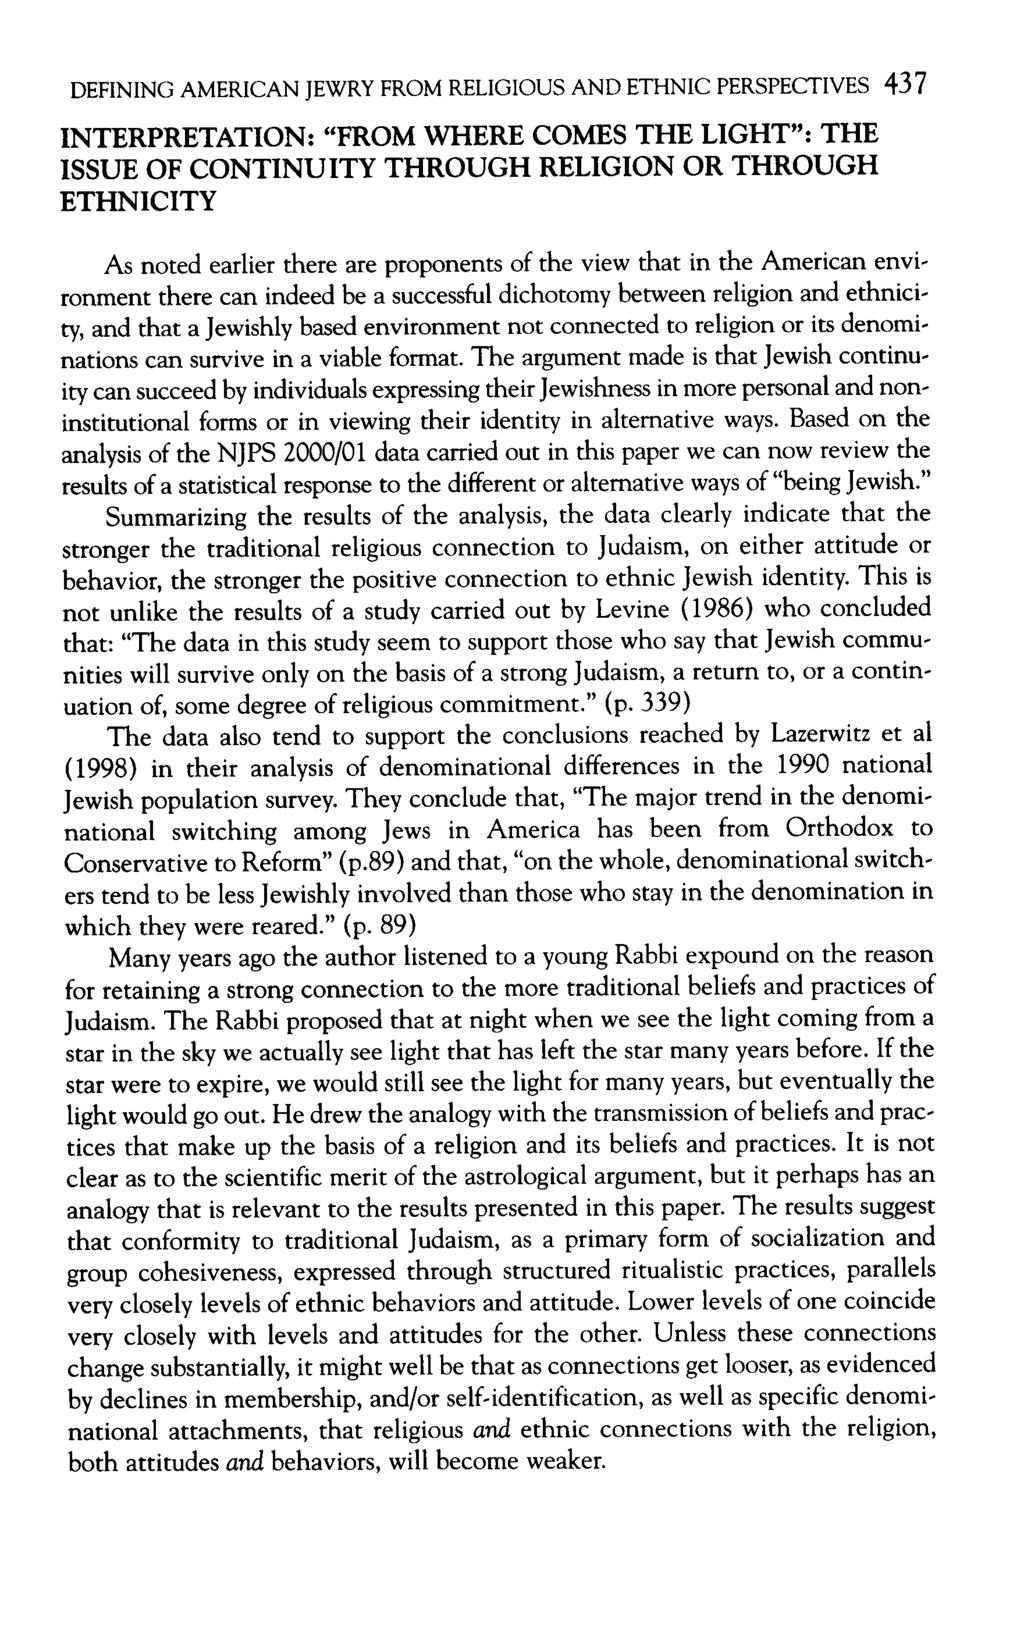 DEFINING AMERICAN JEWRY FROM RELIGIOUS AND ETHNIC PERSPECTIVES 437 INTERPRETATION: "FROM WHERE COMES THE LIGHT": THE ISSUE OF CONTINUITY THROUGH RELIGION OR THROUGH ETHNICITY As noted earlier there